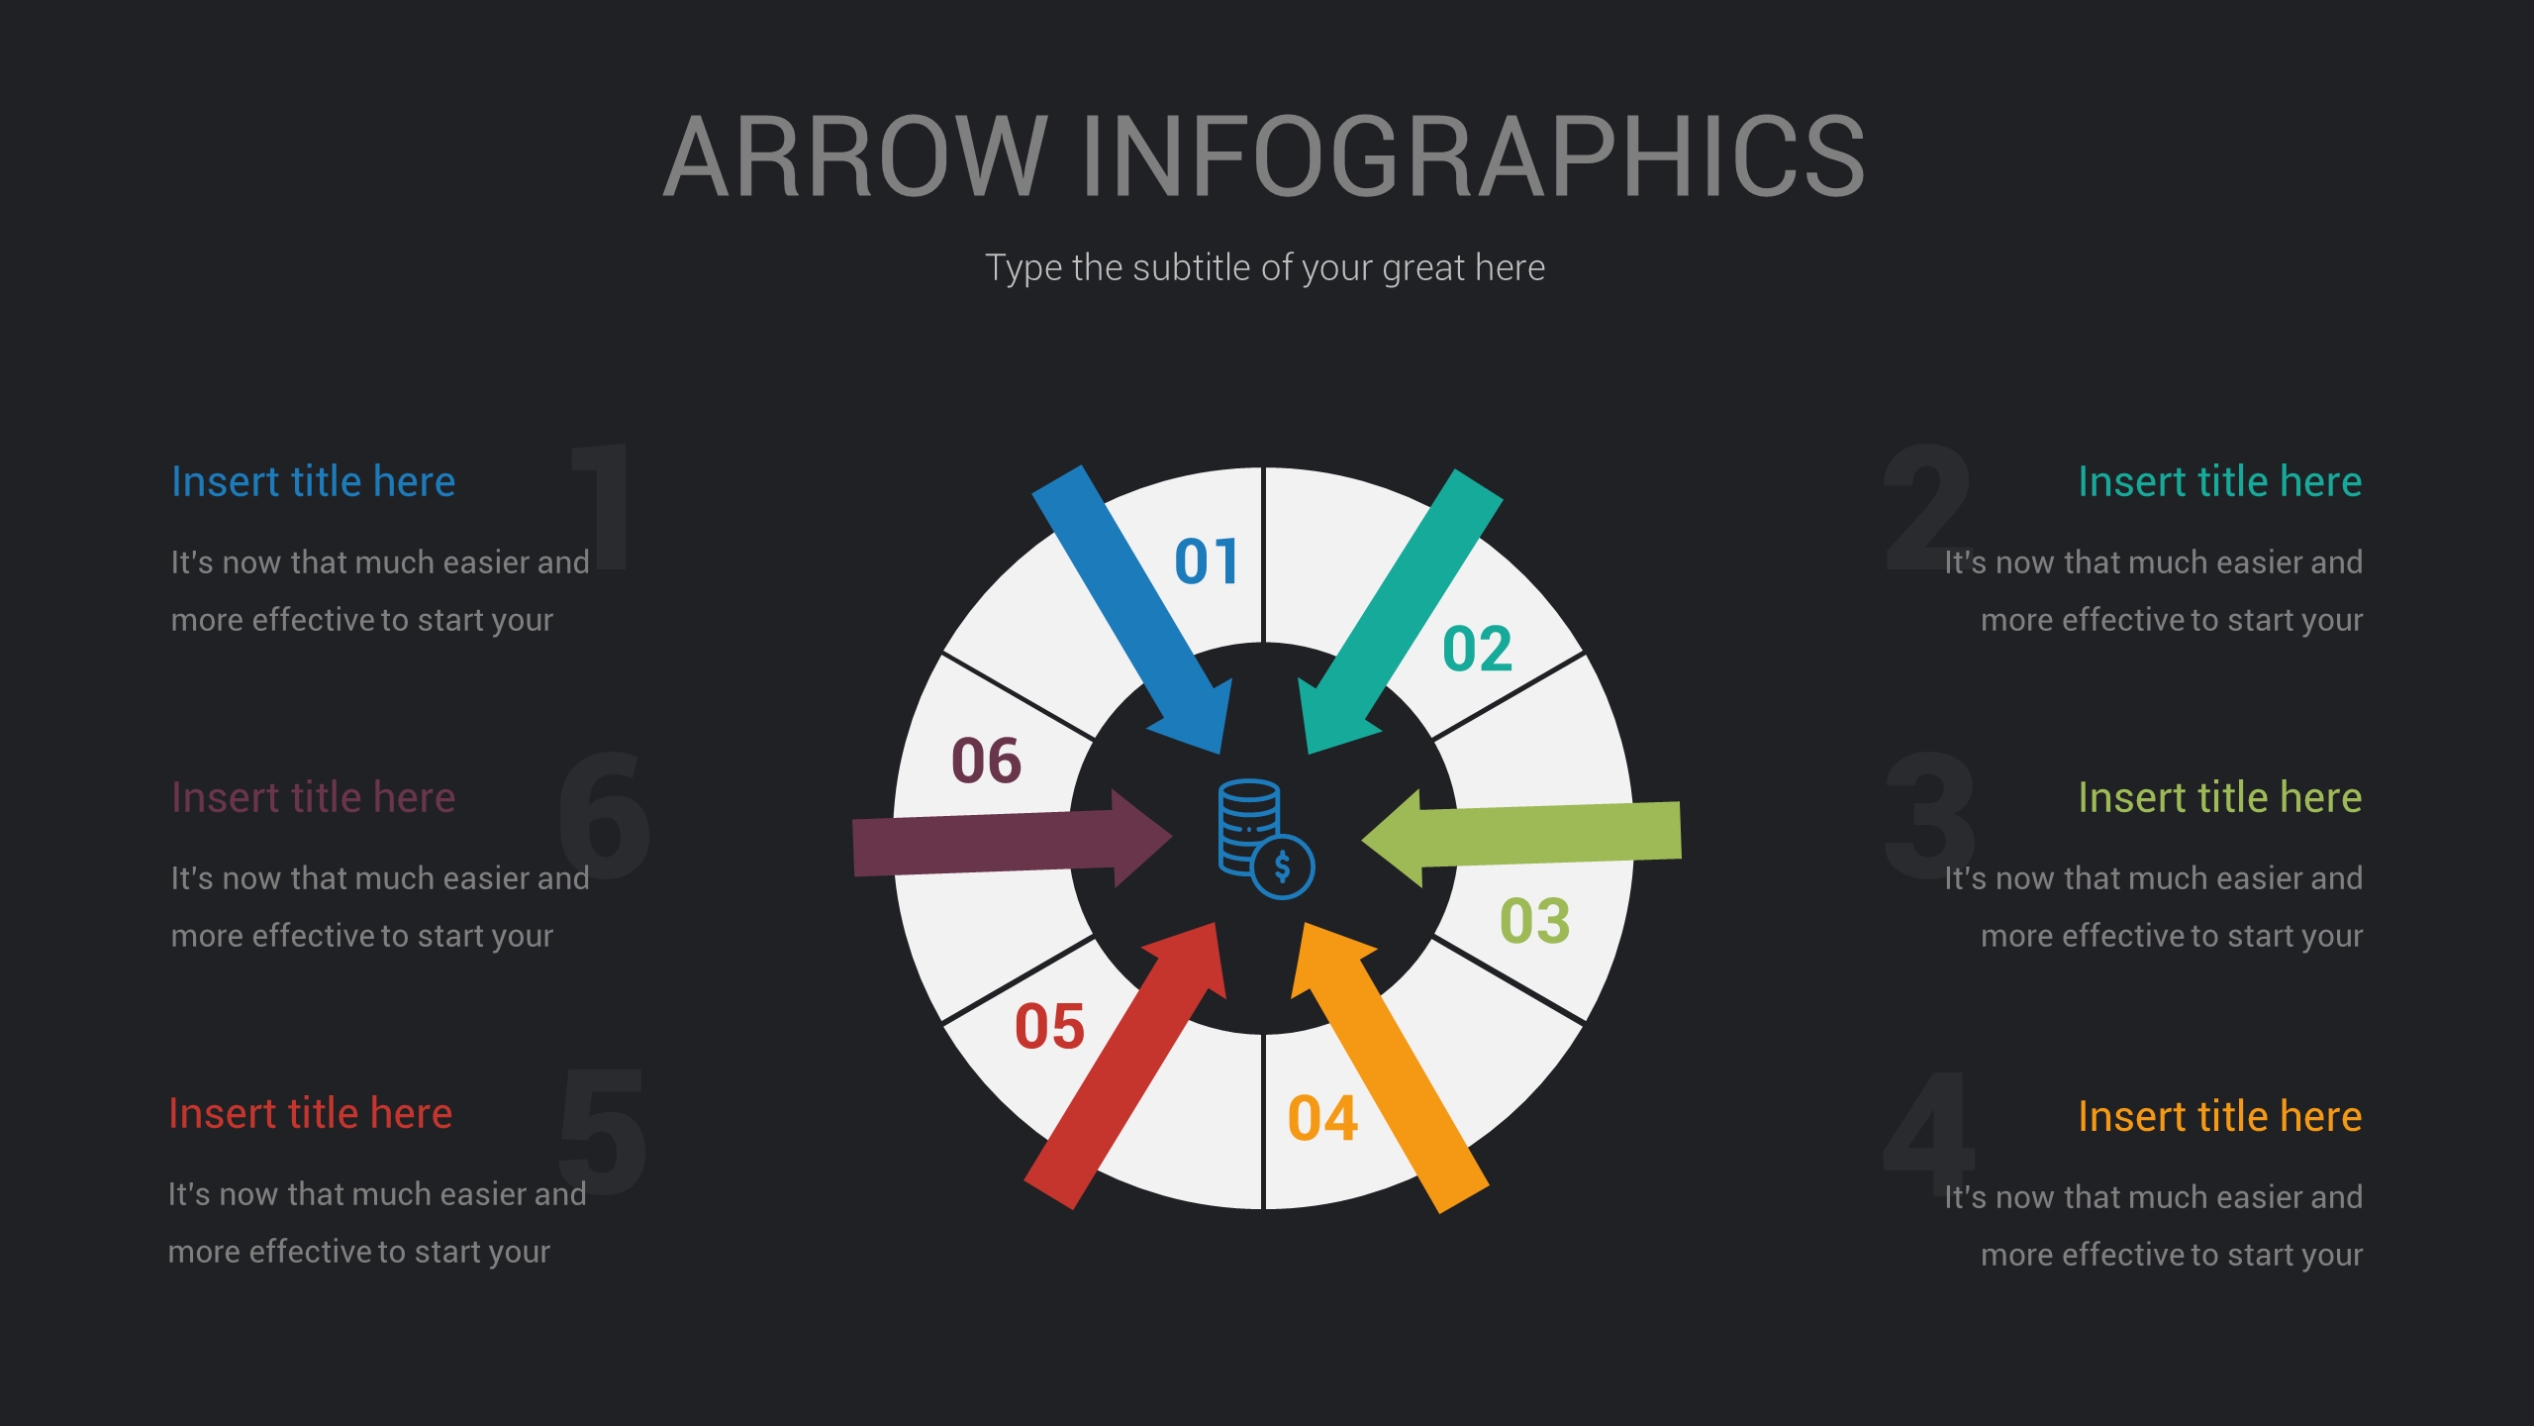 Arrow Infographics Powerpoint, Illustrator Template By Rengstudio | Graphicriver With Illustrator Infographic Template